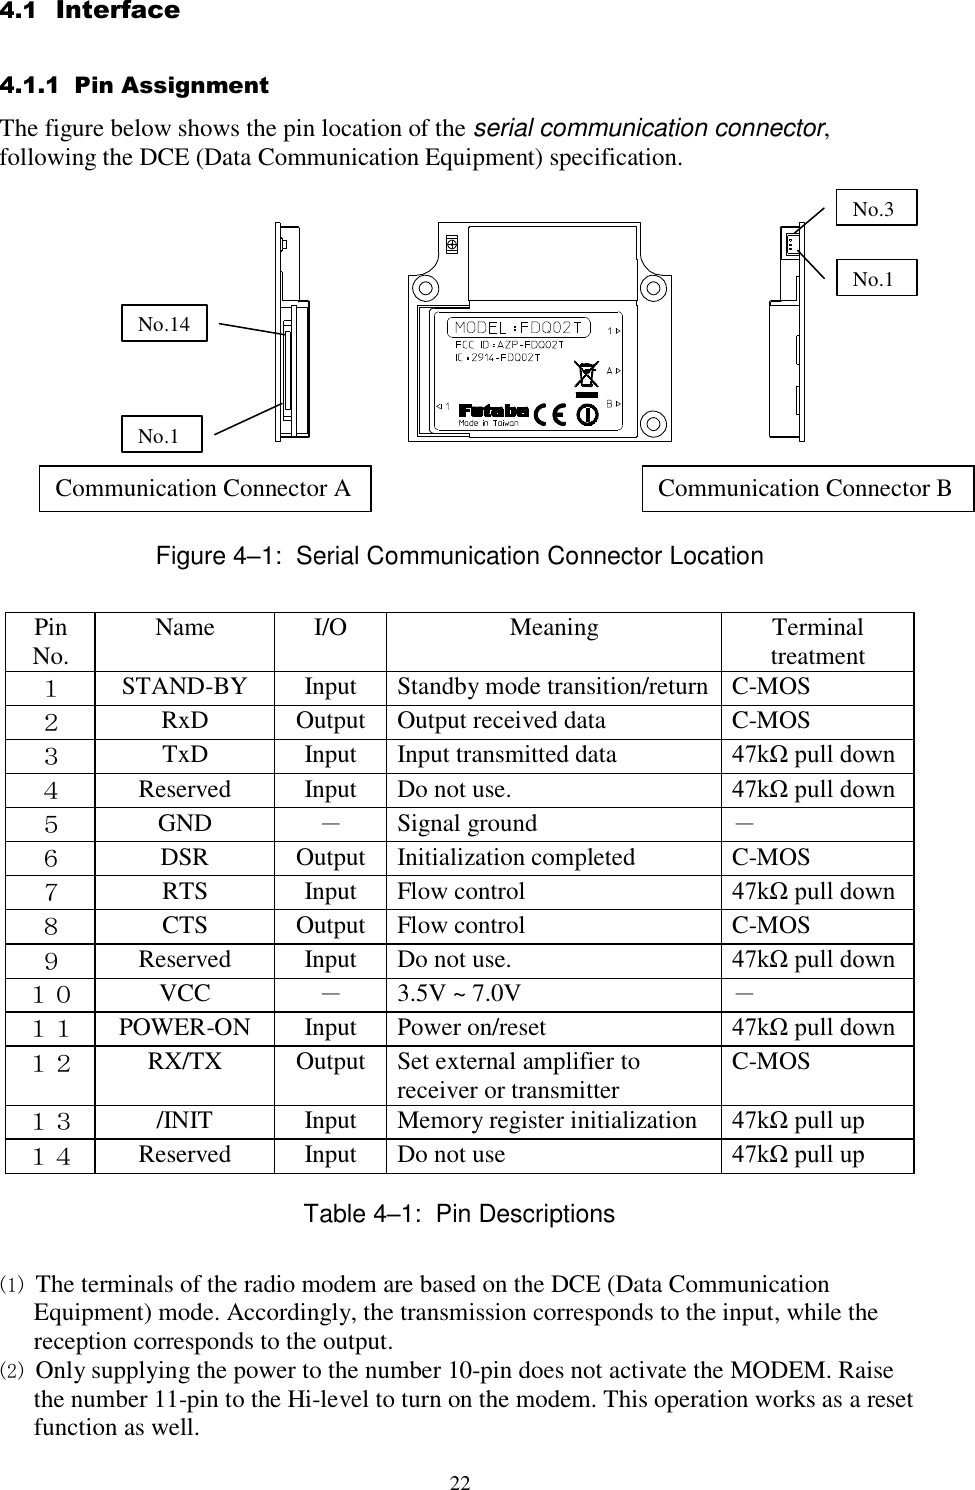  22  4.1  Interface 4.1.1  Pin Assignment The figure below shows the pin location of the serial communication connector, following the DCE (Data Communication Equipment) specification.               Figure 4–1:  Serial Communication Connector Location Pin  No. Name I/O Meaning Terminal treatment １ STAND-BY Input Standby mode transition/return C-MOS ２ RxD Output Output received data C-MOS ３ TxD Input Input transmitted data 47kΩ pull down  ４ Reserved Input Do not use. 47kΩ pull down ５ GND － Signal ground － ６ DSR Output Initialization completed C-MOS ７ RTS Input Flow control 47kΩ pull down ８ CTS Output Flow control C-MOS ９ Reserved Input Do not use. 47kΩ pull down １０ VCC － 3.5V ~ 7.0V － １１ POWER-ON Input Power on/reset 47kΩ pull down １２ RX/TX Output Set external amplifier to receiver or transmitter C-MOS １３ /INIT Input Memory register initialization 47kΩ pull up １４ Reserved Input Do not use 47kΩ pull up Table 4–1:  Pin Descriptions (1) The terminals of the radio modem are based on the DCE (Data Communication Equipment) mode. Accordingly, the transmission corresponds to the input, while the reception corresponds to the output. (2) Only supplying the power to the number 10-pin does not activate the MODEM. Raise the number 11-pin to the Hi-level to turn on the modem. This operation works as a reset function as well. No.1 No.14 No.1 No.3 Communication Connector A Communication Connector B 